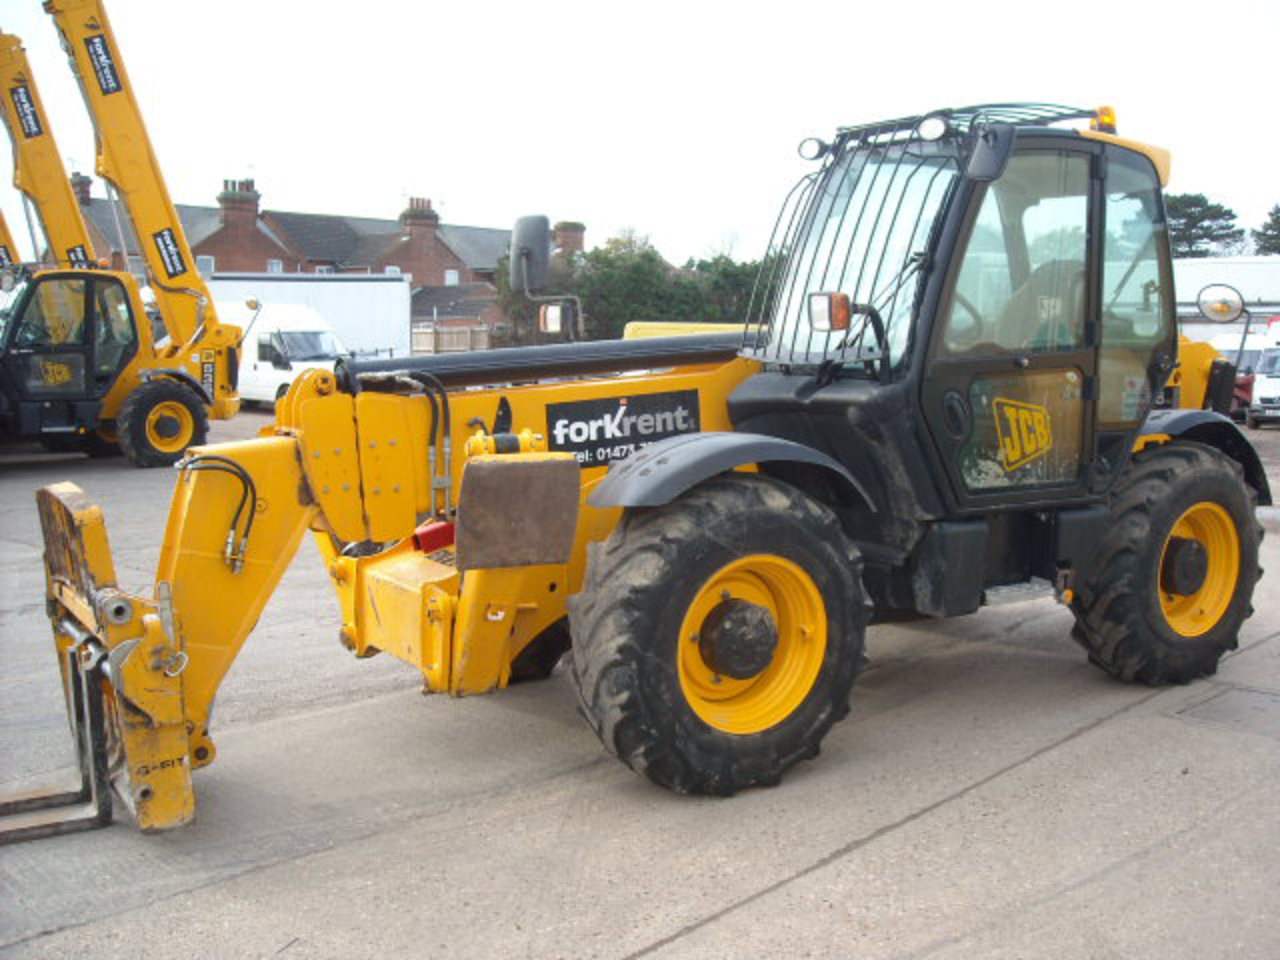 JCB Loadall 535 140 Photo Gallery: Photo #05 out of 12, Image Size ...